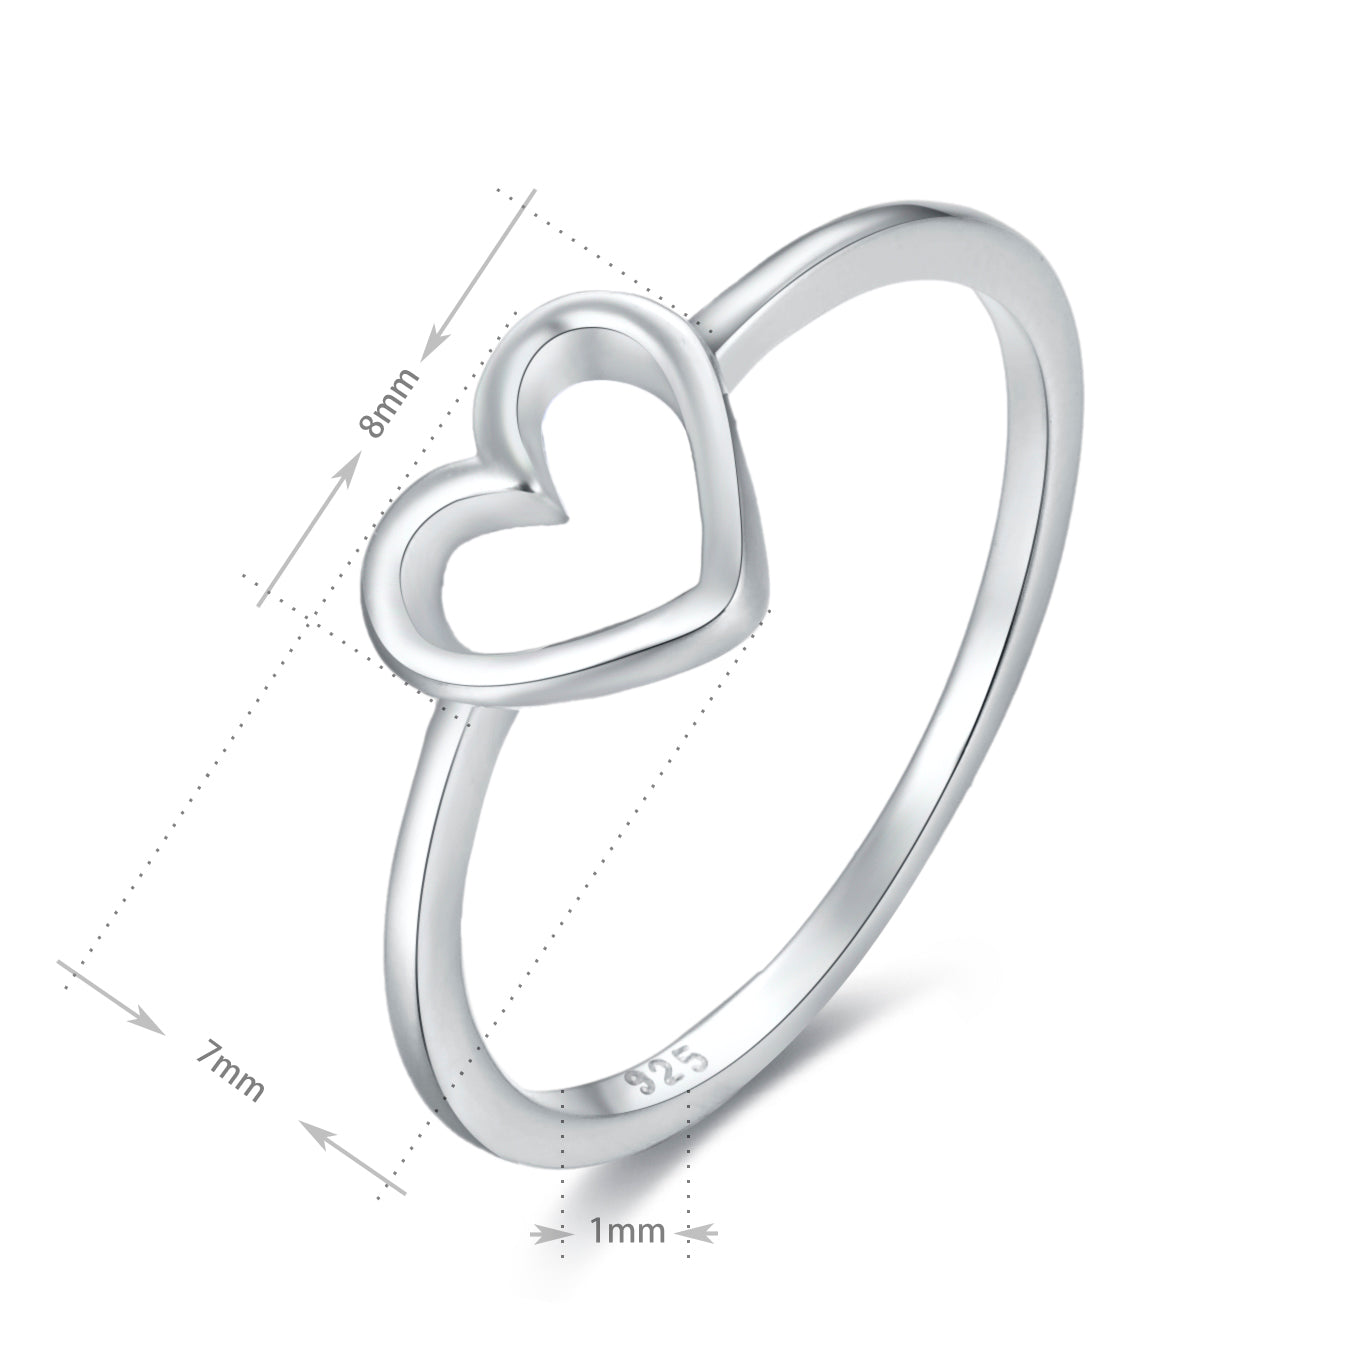 Buy quality Silver 925 heart shape ring sr925-19 in Ahmedabad